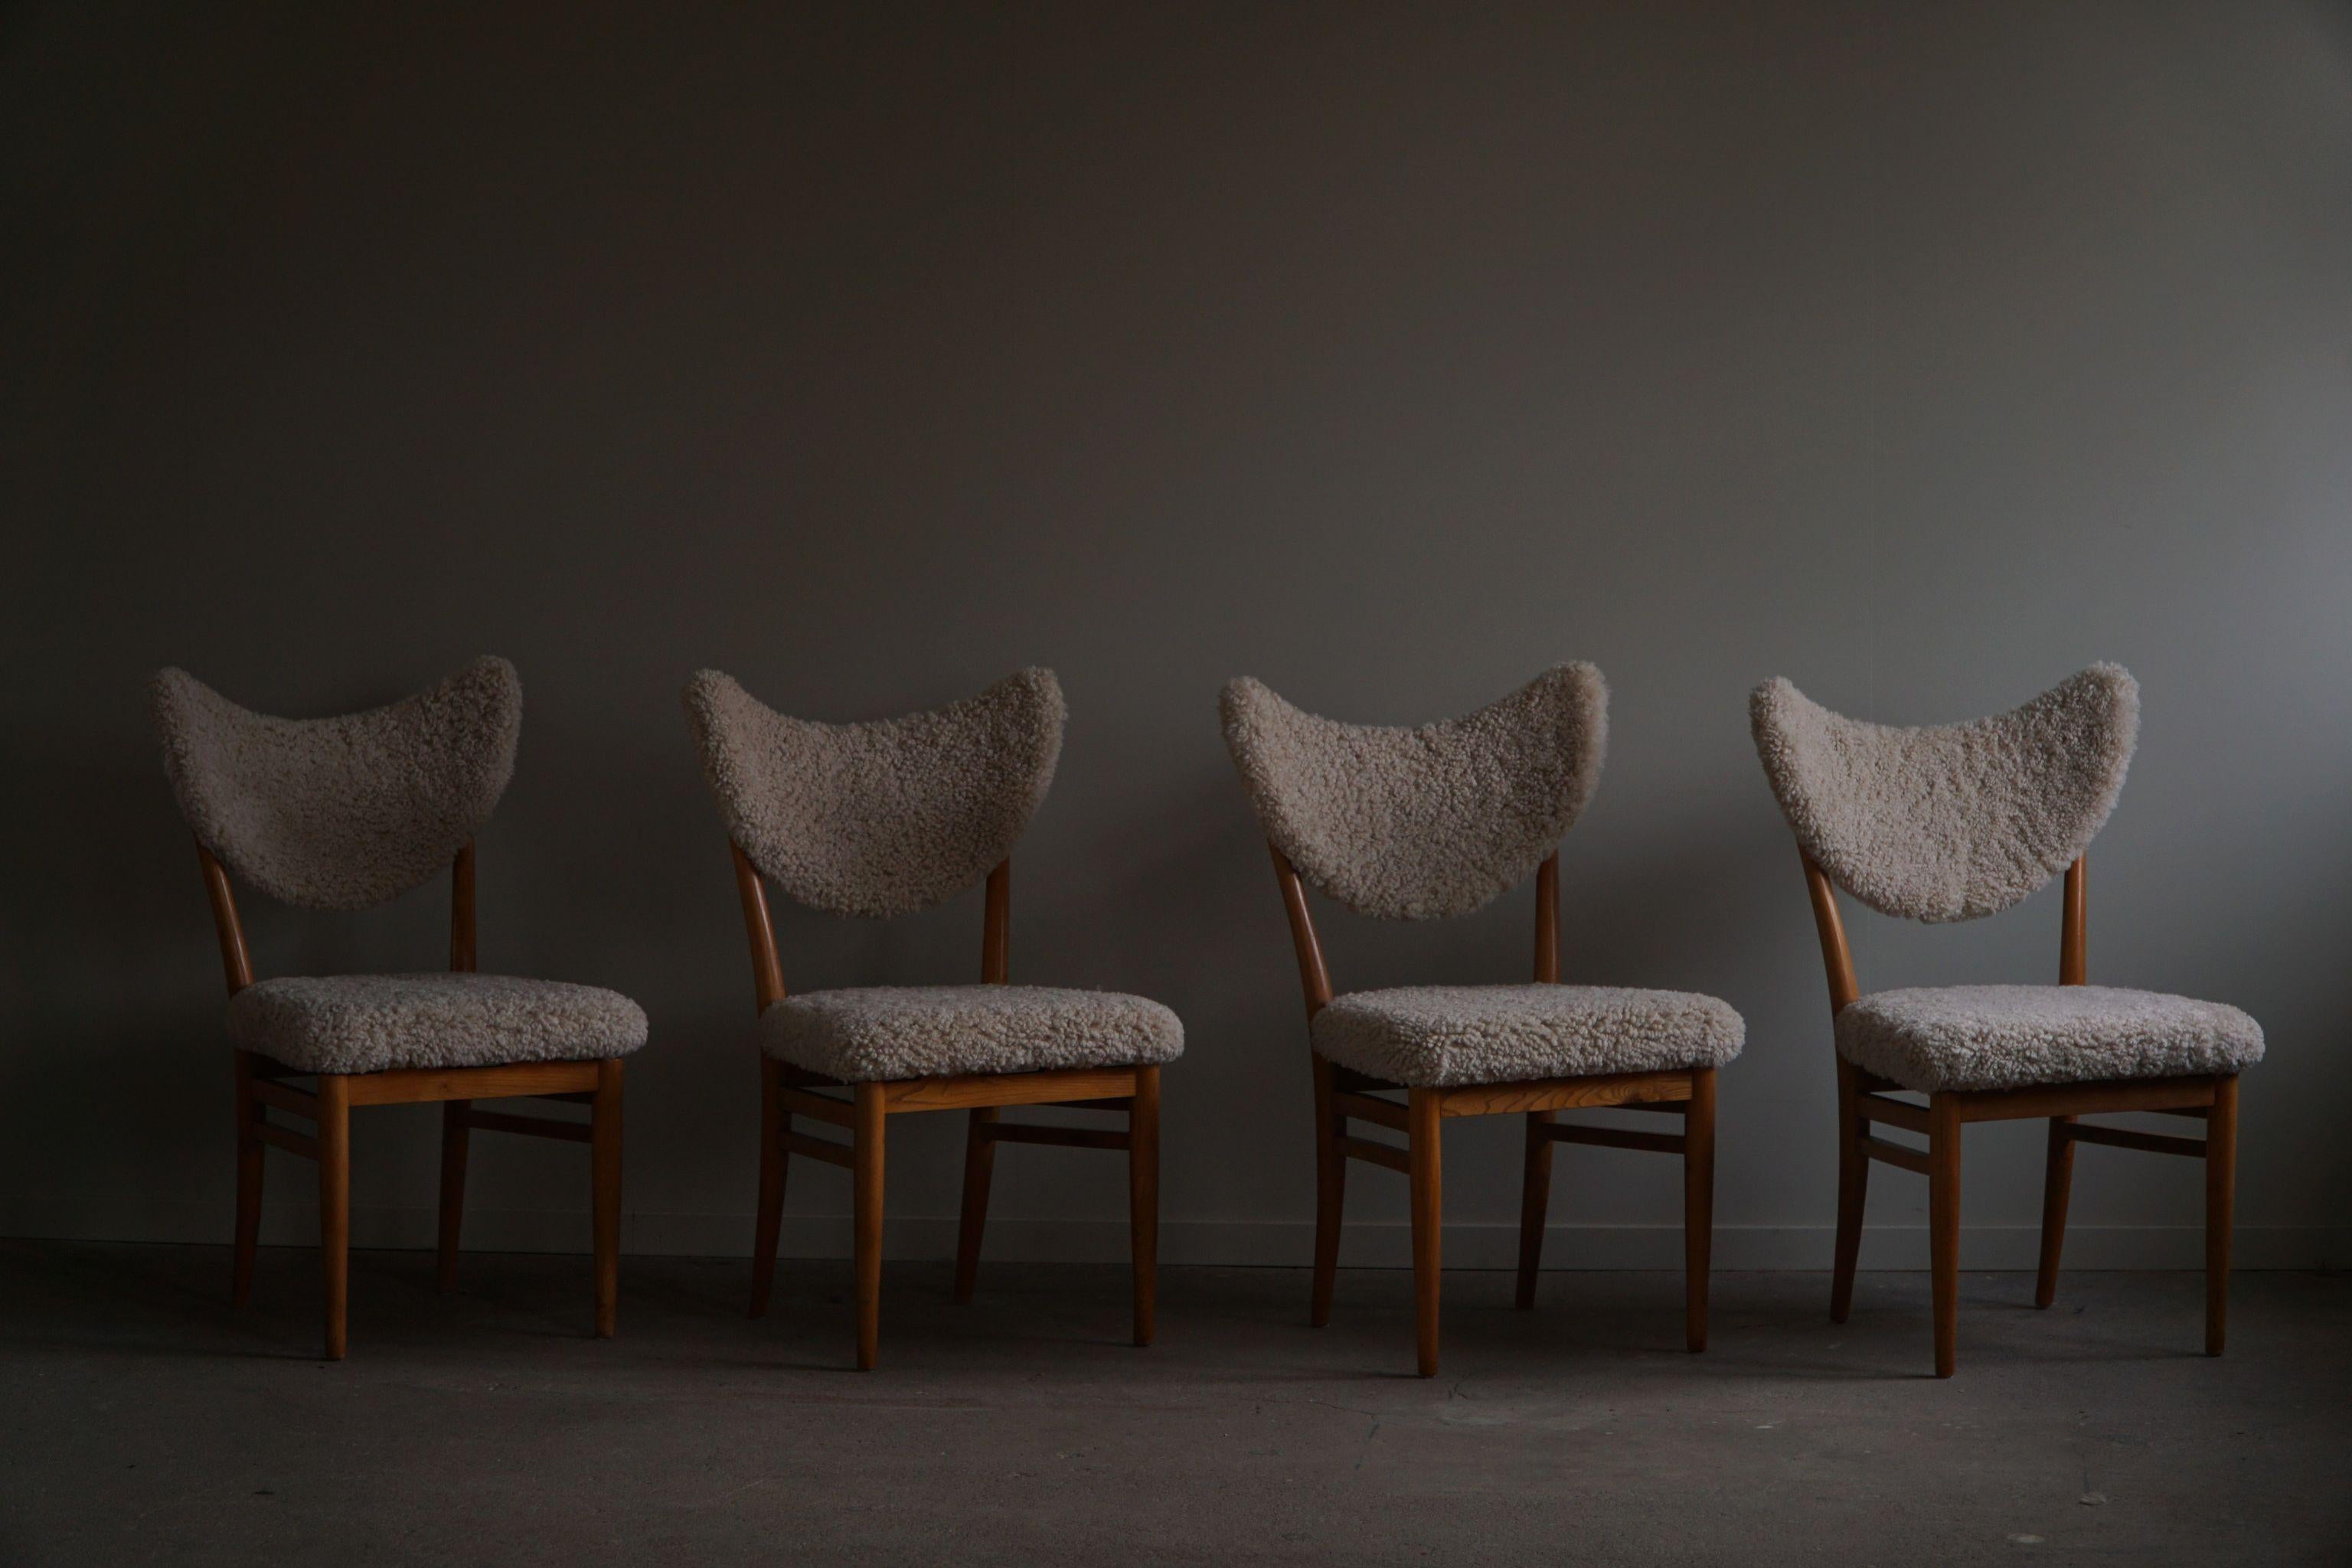 Hvidt & Mølgaard, Set of 4 Chairs in Ash, Reupholstered in Lambswool, 1950s For Sale 12